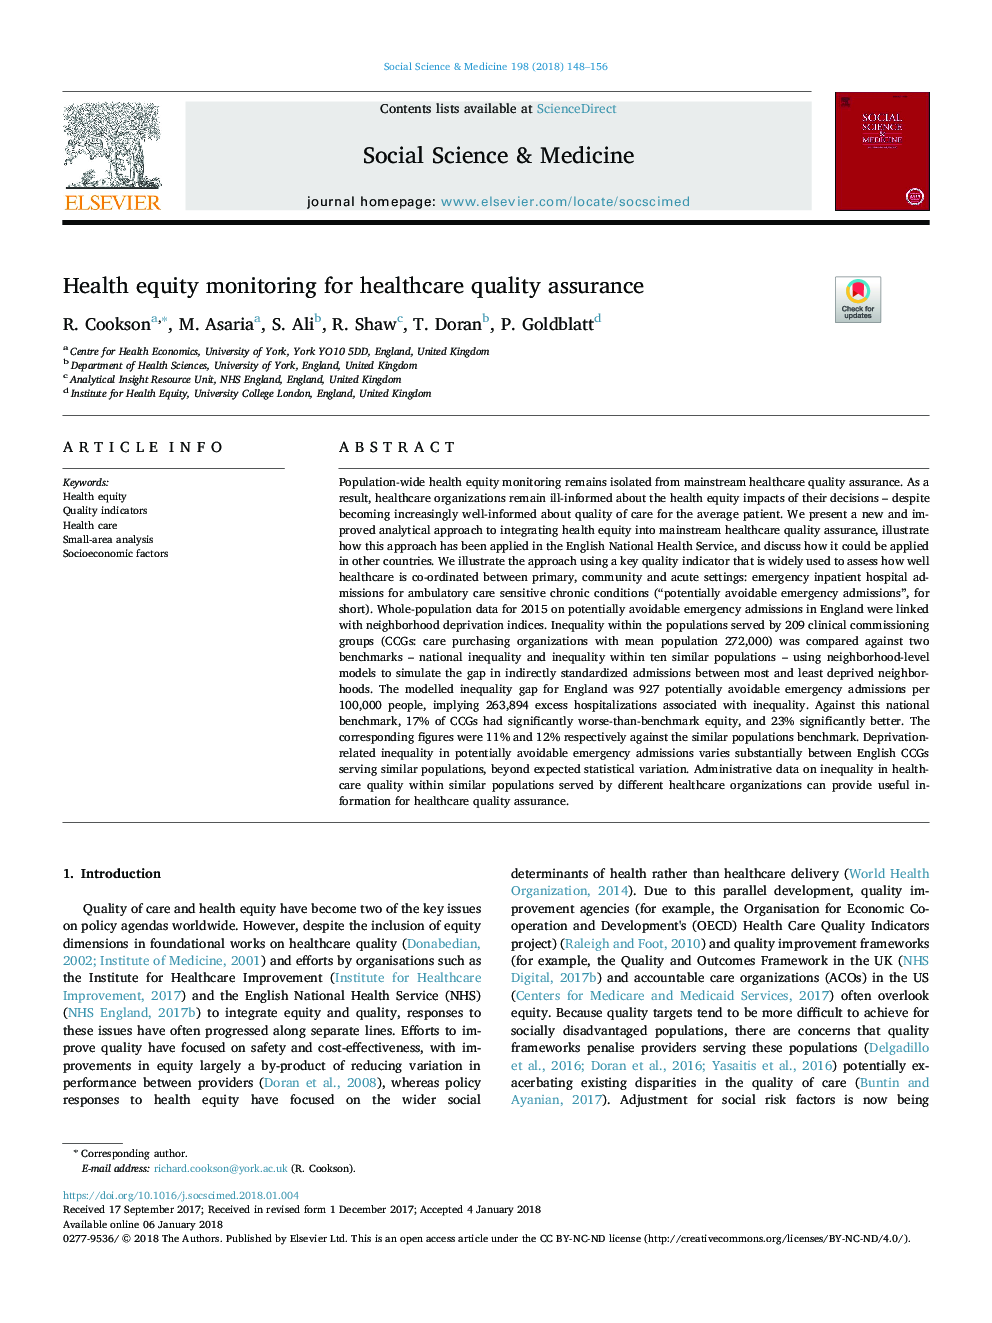 Health equity monitoring for healthcare quality assurance